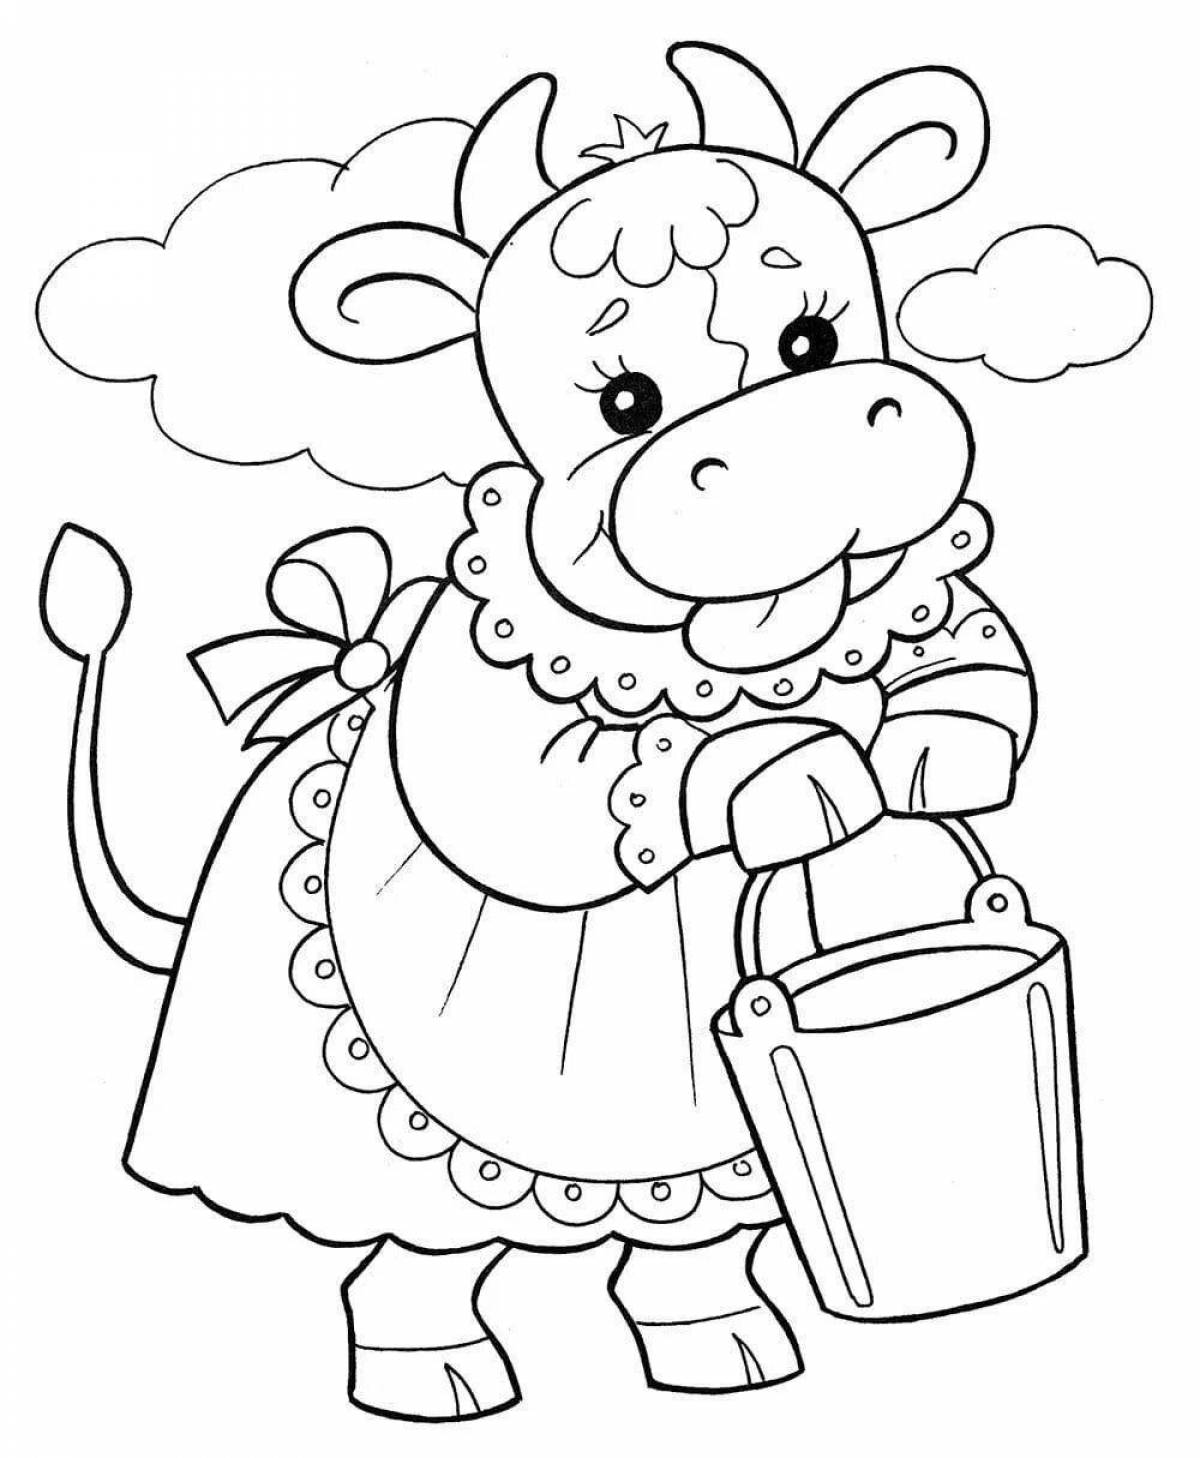 Gorgeous cow coloring book for 5-6 year olds